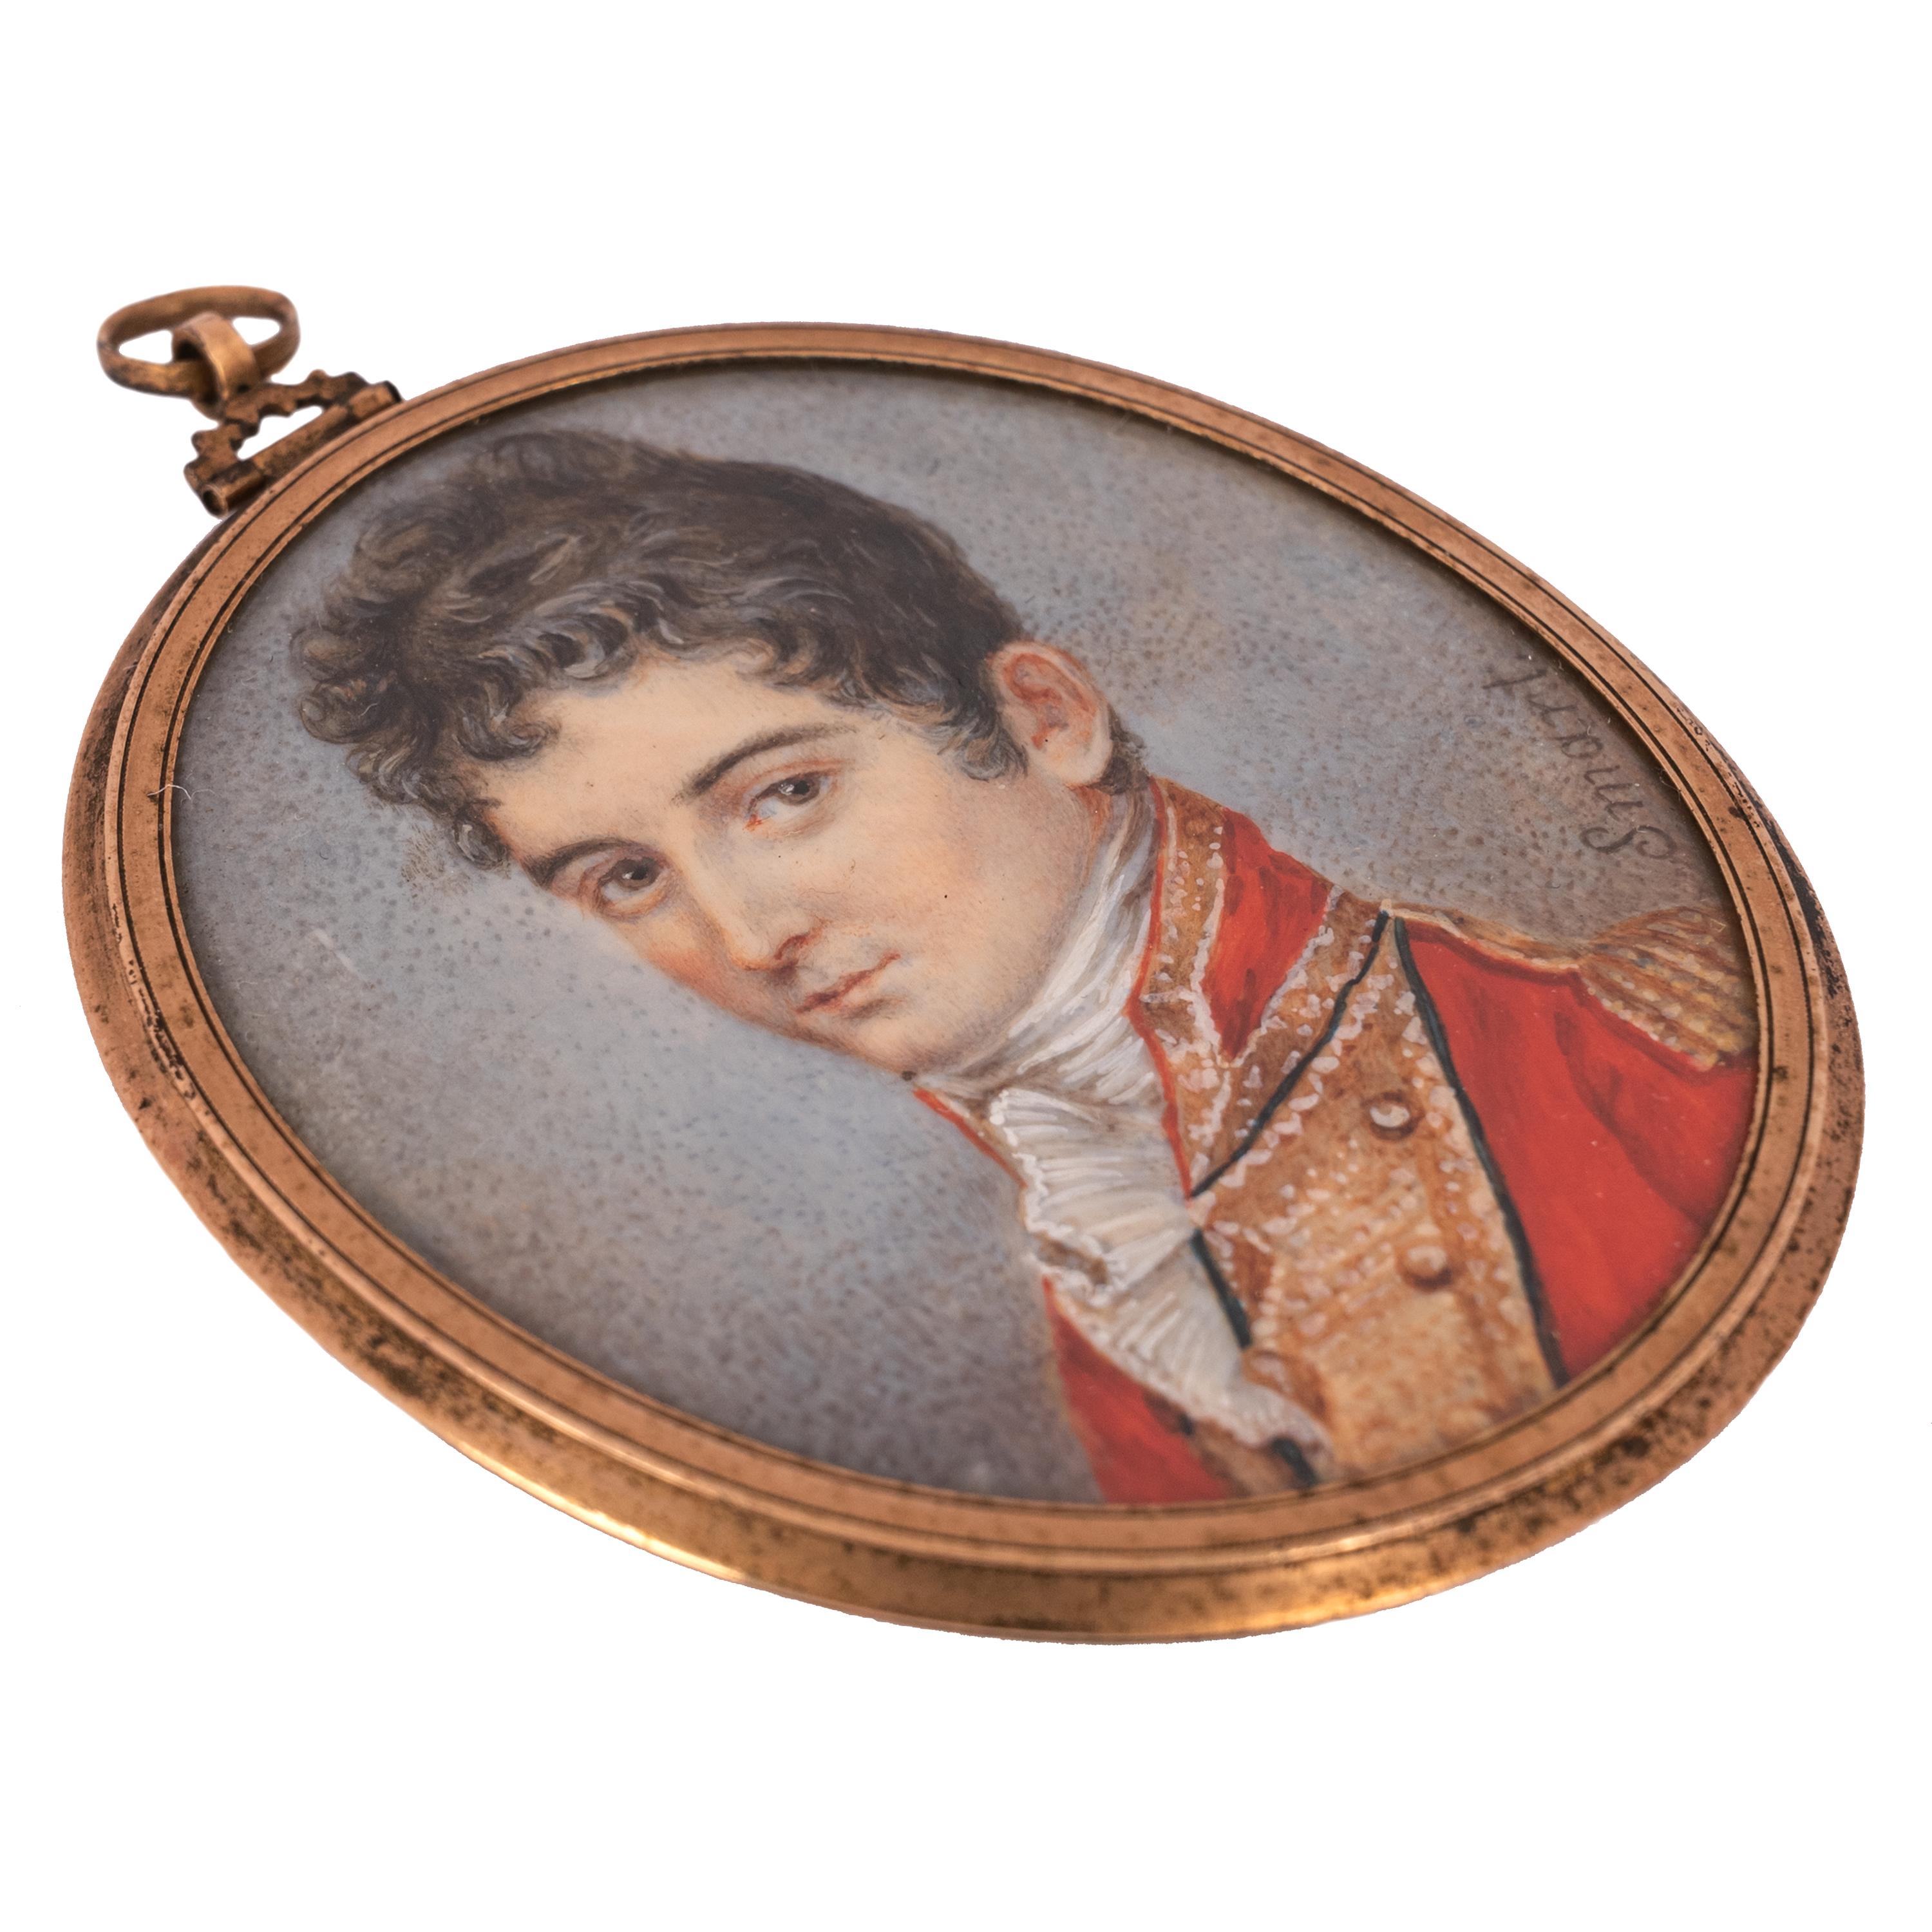 Antique Miniature Young Man Military Officer Portrait Painting John Smart, 1780 In Good Condition For Sale In Portland, OR